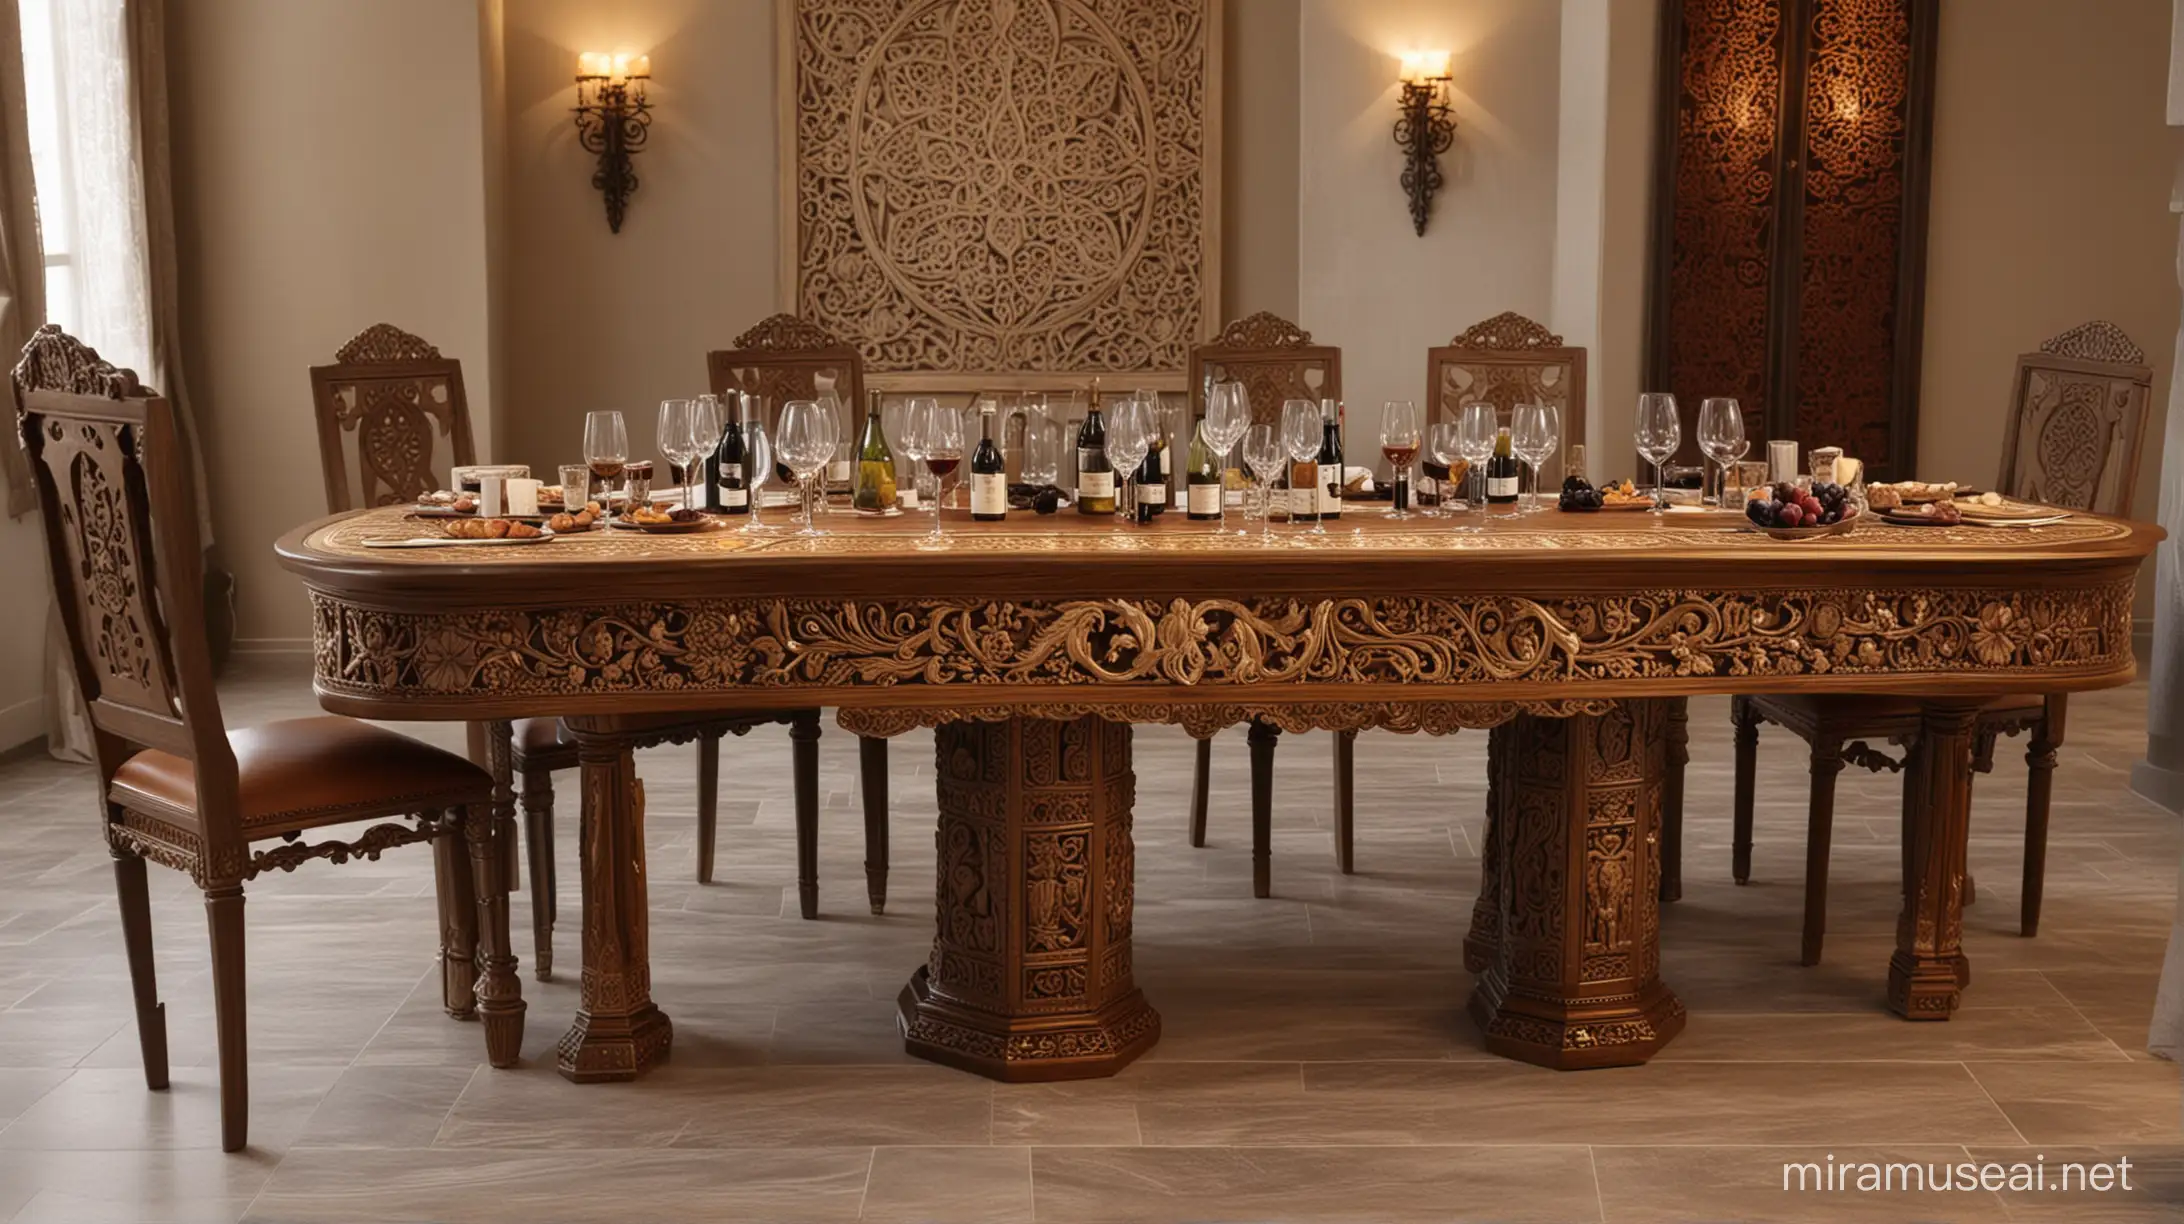 luxurious and exclusive Armenian royal table for wine tasting, with Armenian ornaments, in 2060